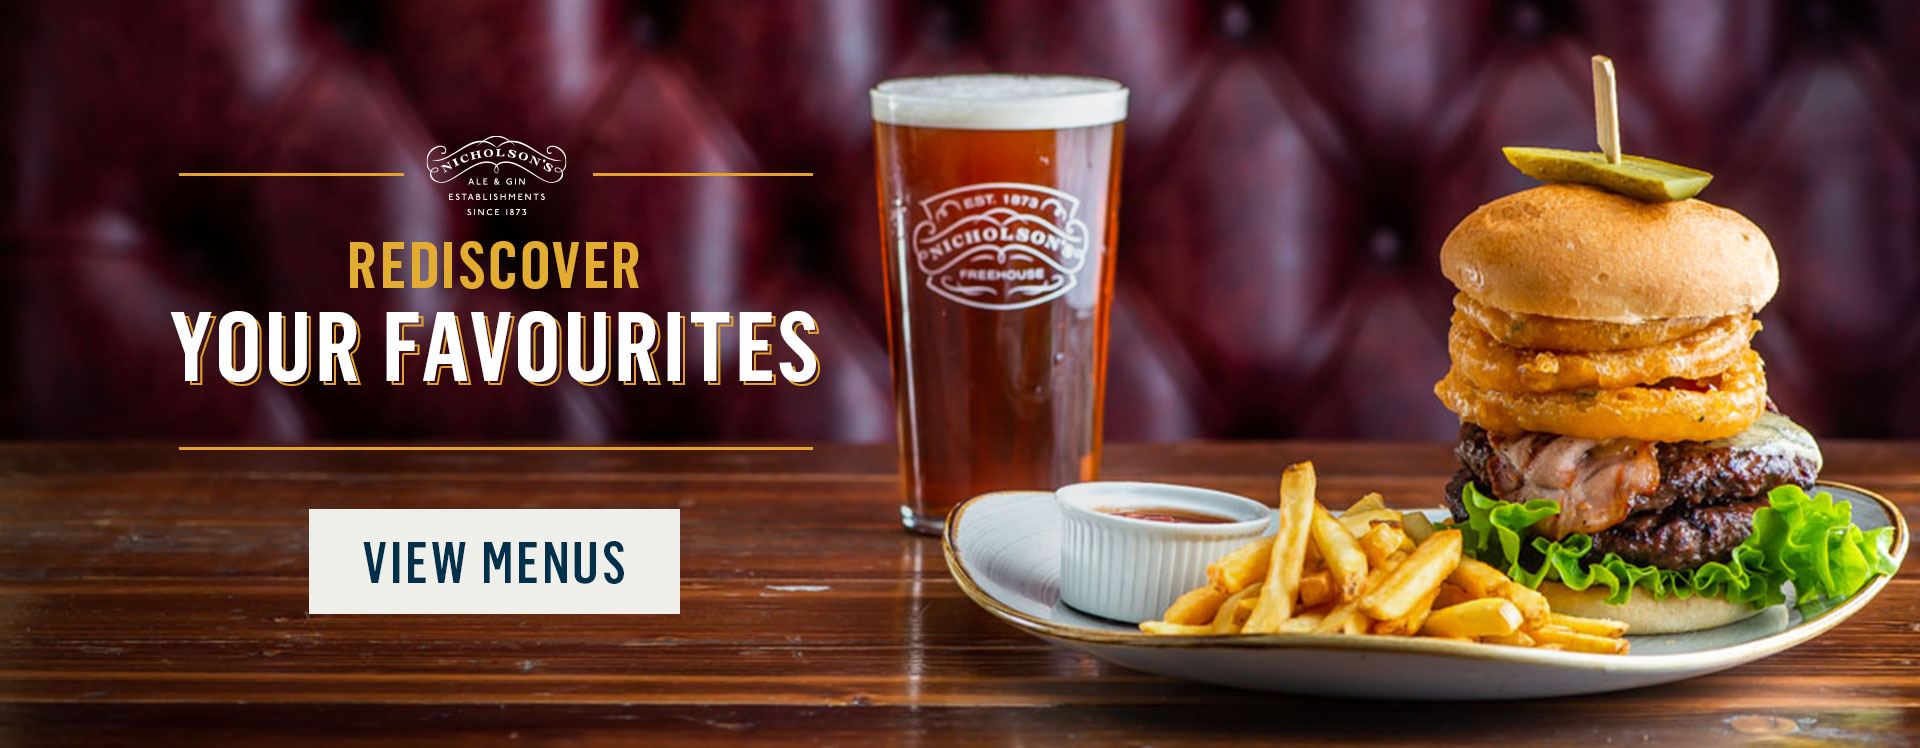 Rediscover your favourites at The Old Thameside Inn